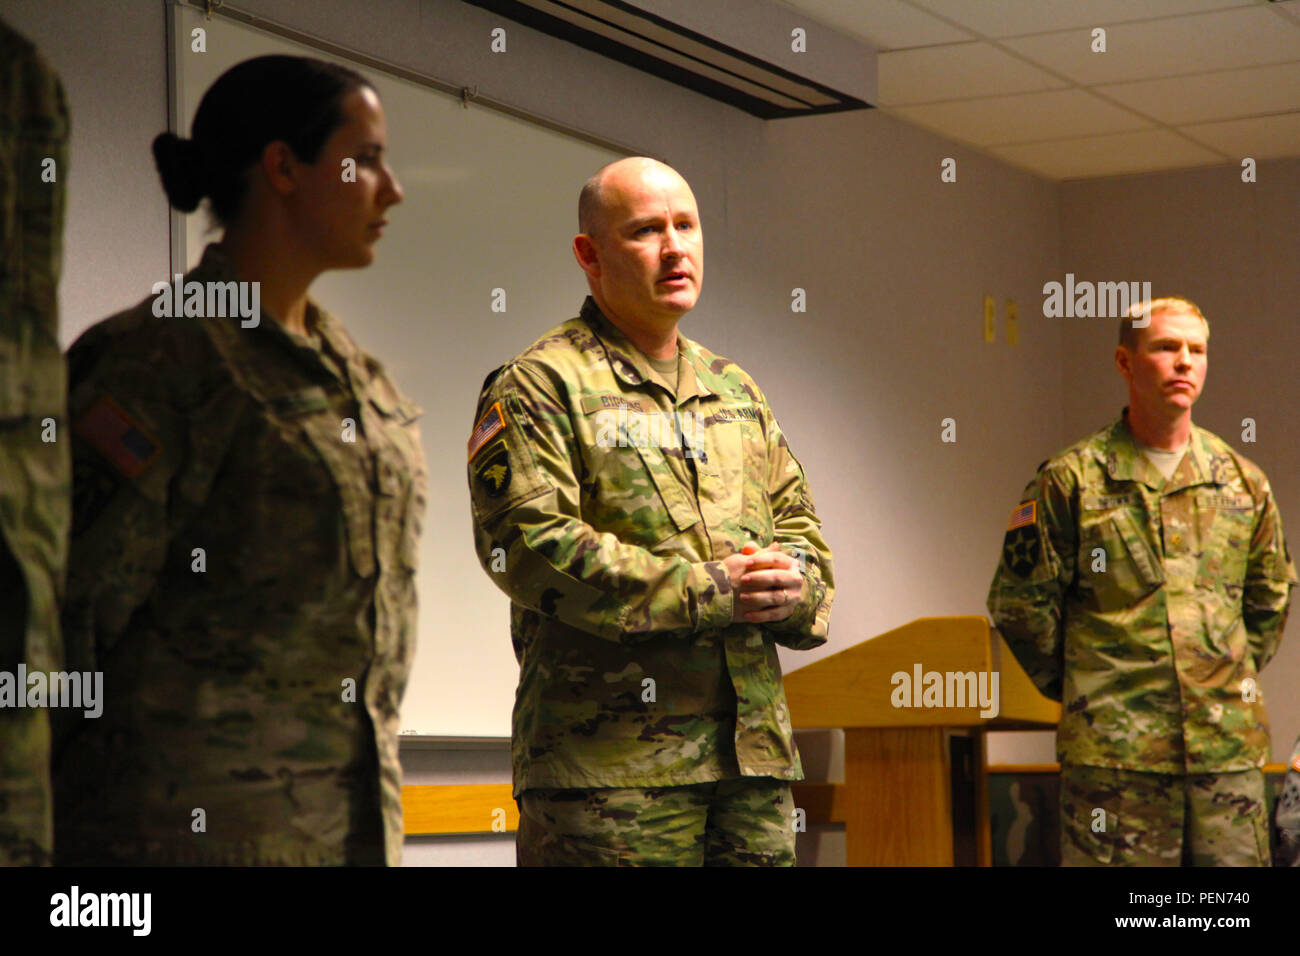 https://c8.alamy.com/comp/PEN740/us-army-lt-col-david-biggins-commander-of-the-114th-signal-battalion-speaks-to-the-deployment-team-during-the-deployment-farewell-ceremony-at-fort-george-g-meade-md-dec-3-2015-the-55th-signal-company-deploys-soldiers-regularly-to-locations-all-over-the-world-us-army-photo-by-spc-eric-hurtadoreleased-PEN740.jpg